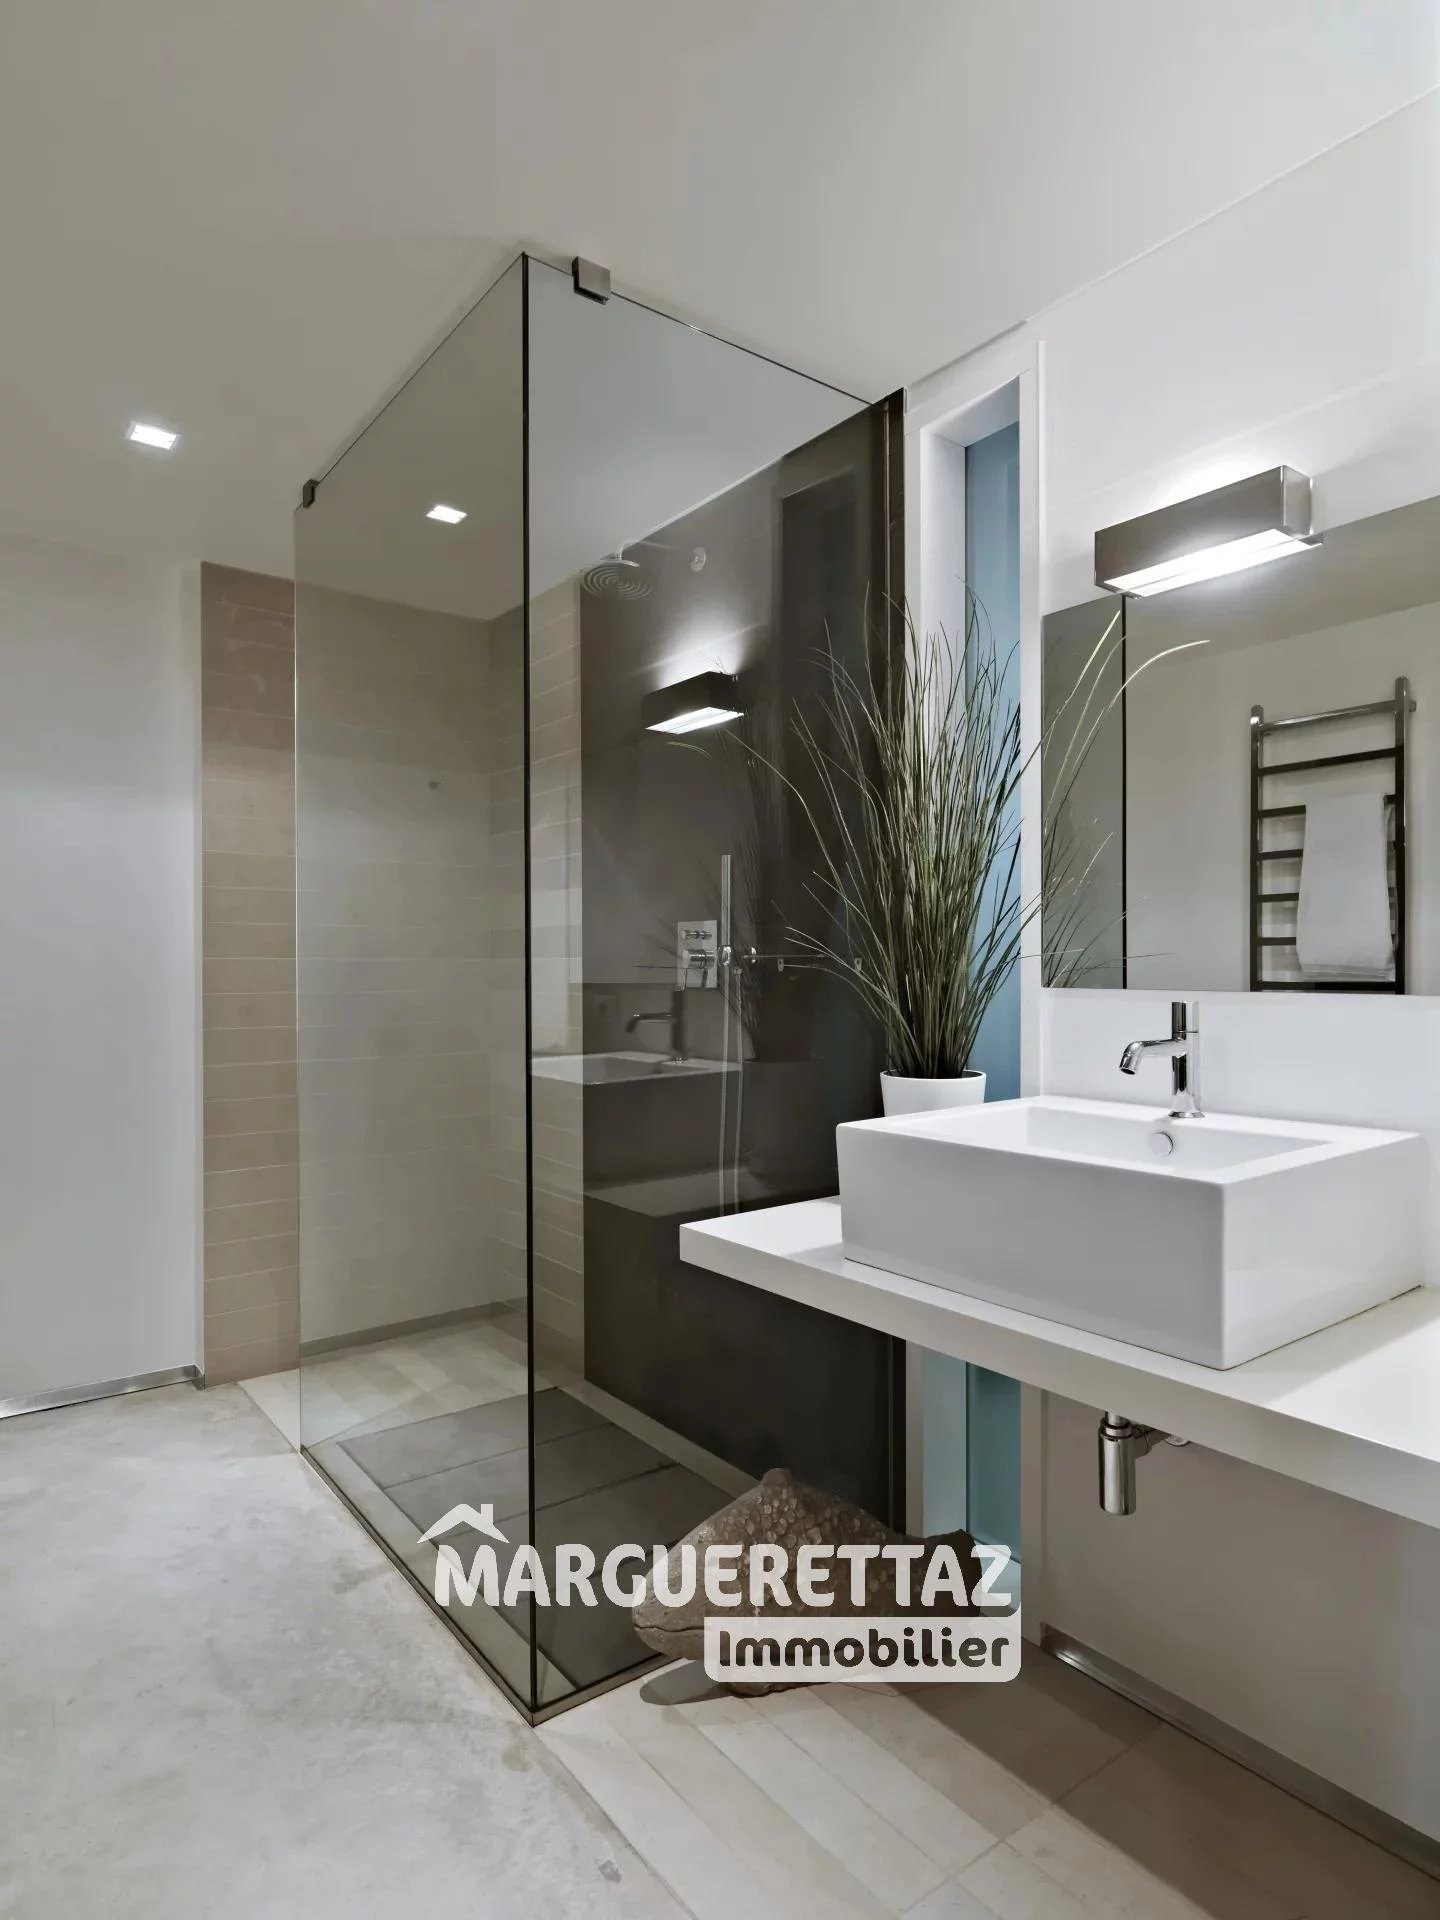 interior shots of a modern bathroom in foreground the countertop washbasin and the glass shower box